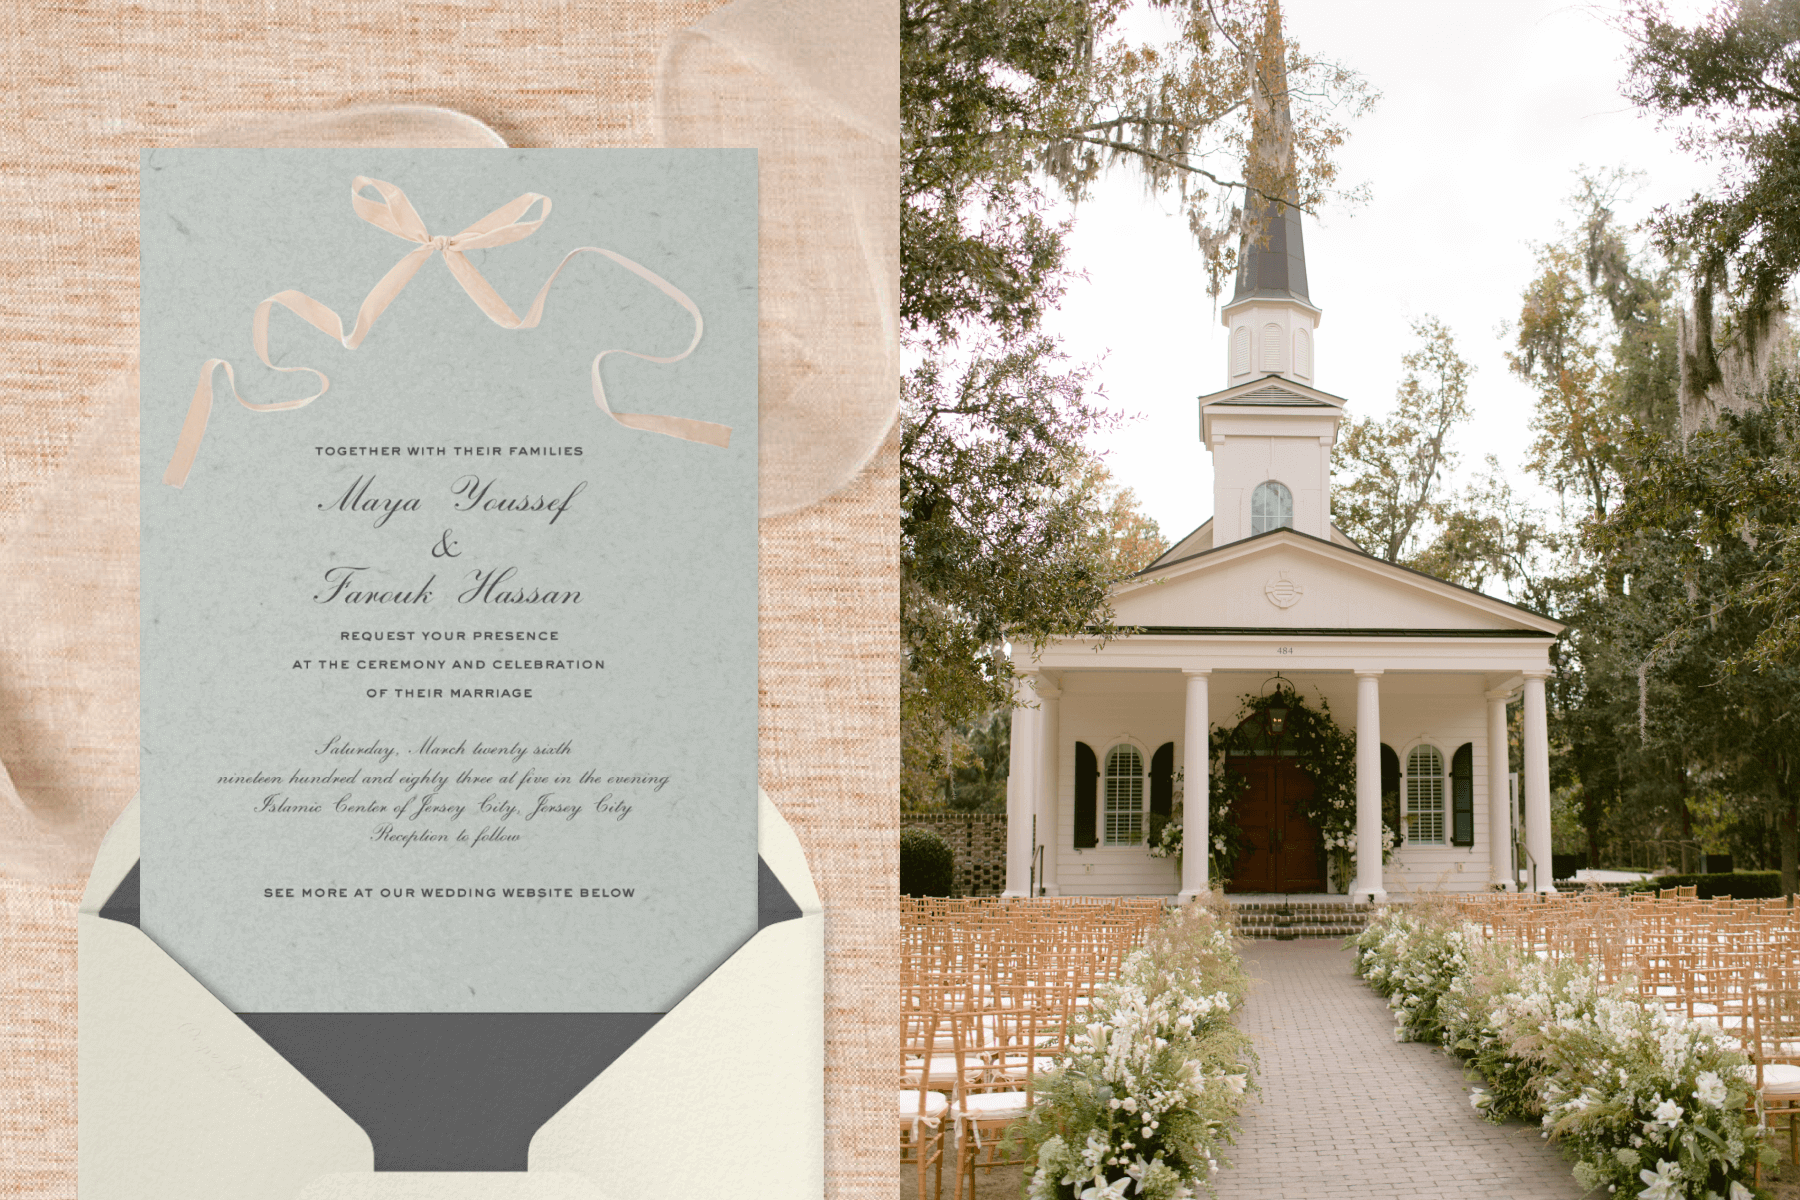 Left: Wedding invitation with a textured light blue background and soft pink bow made out of ribbon at the top, with an off-white envelope and dark grey liner. Right: Small white chapel flanked by tall, mossy oak trees with chairs and a wedding aisle placed in front. 